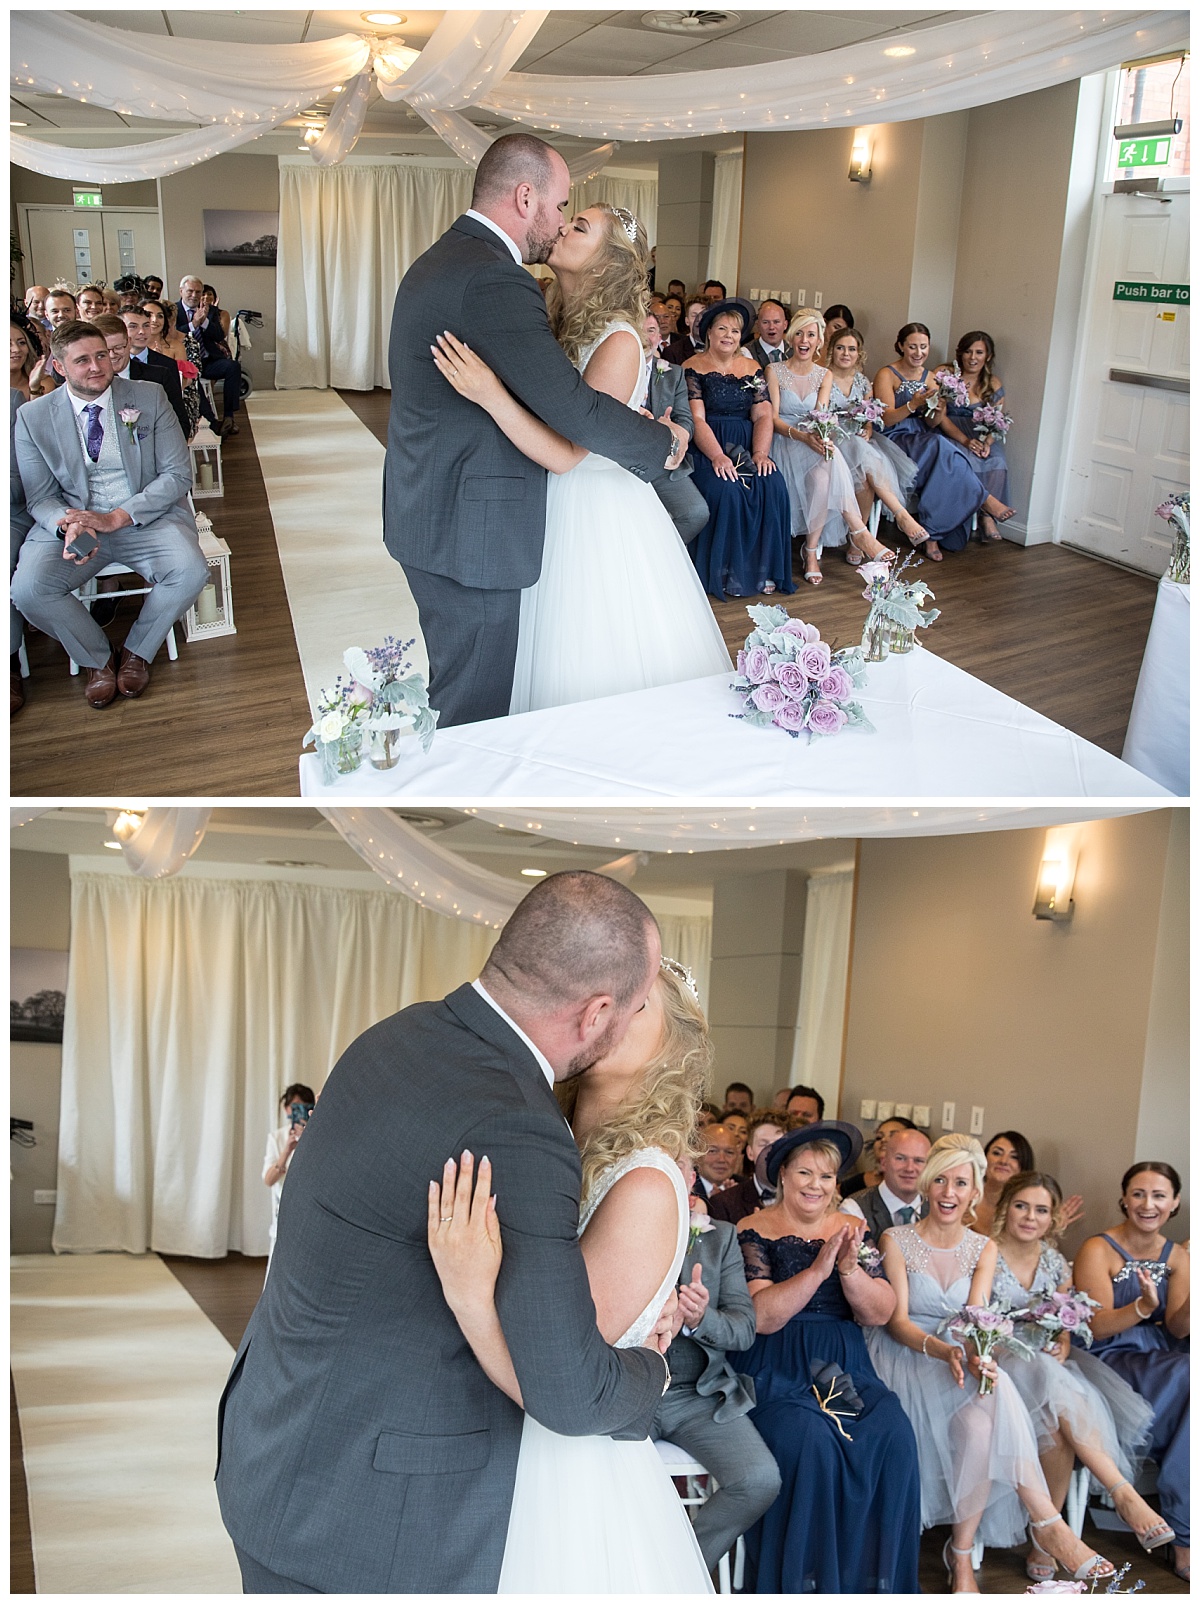 Wedding Photography Manchester - Sam and James's Cheadle House Wedding 43